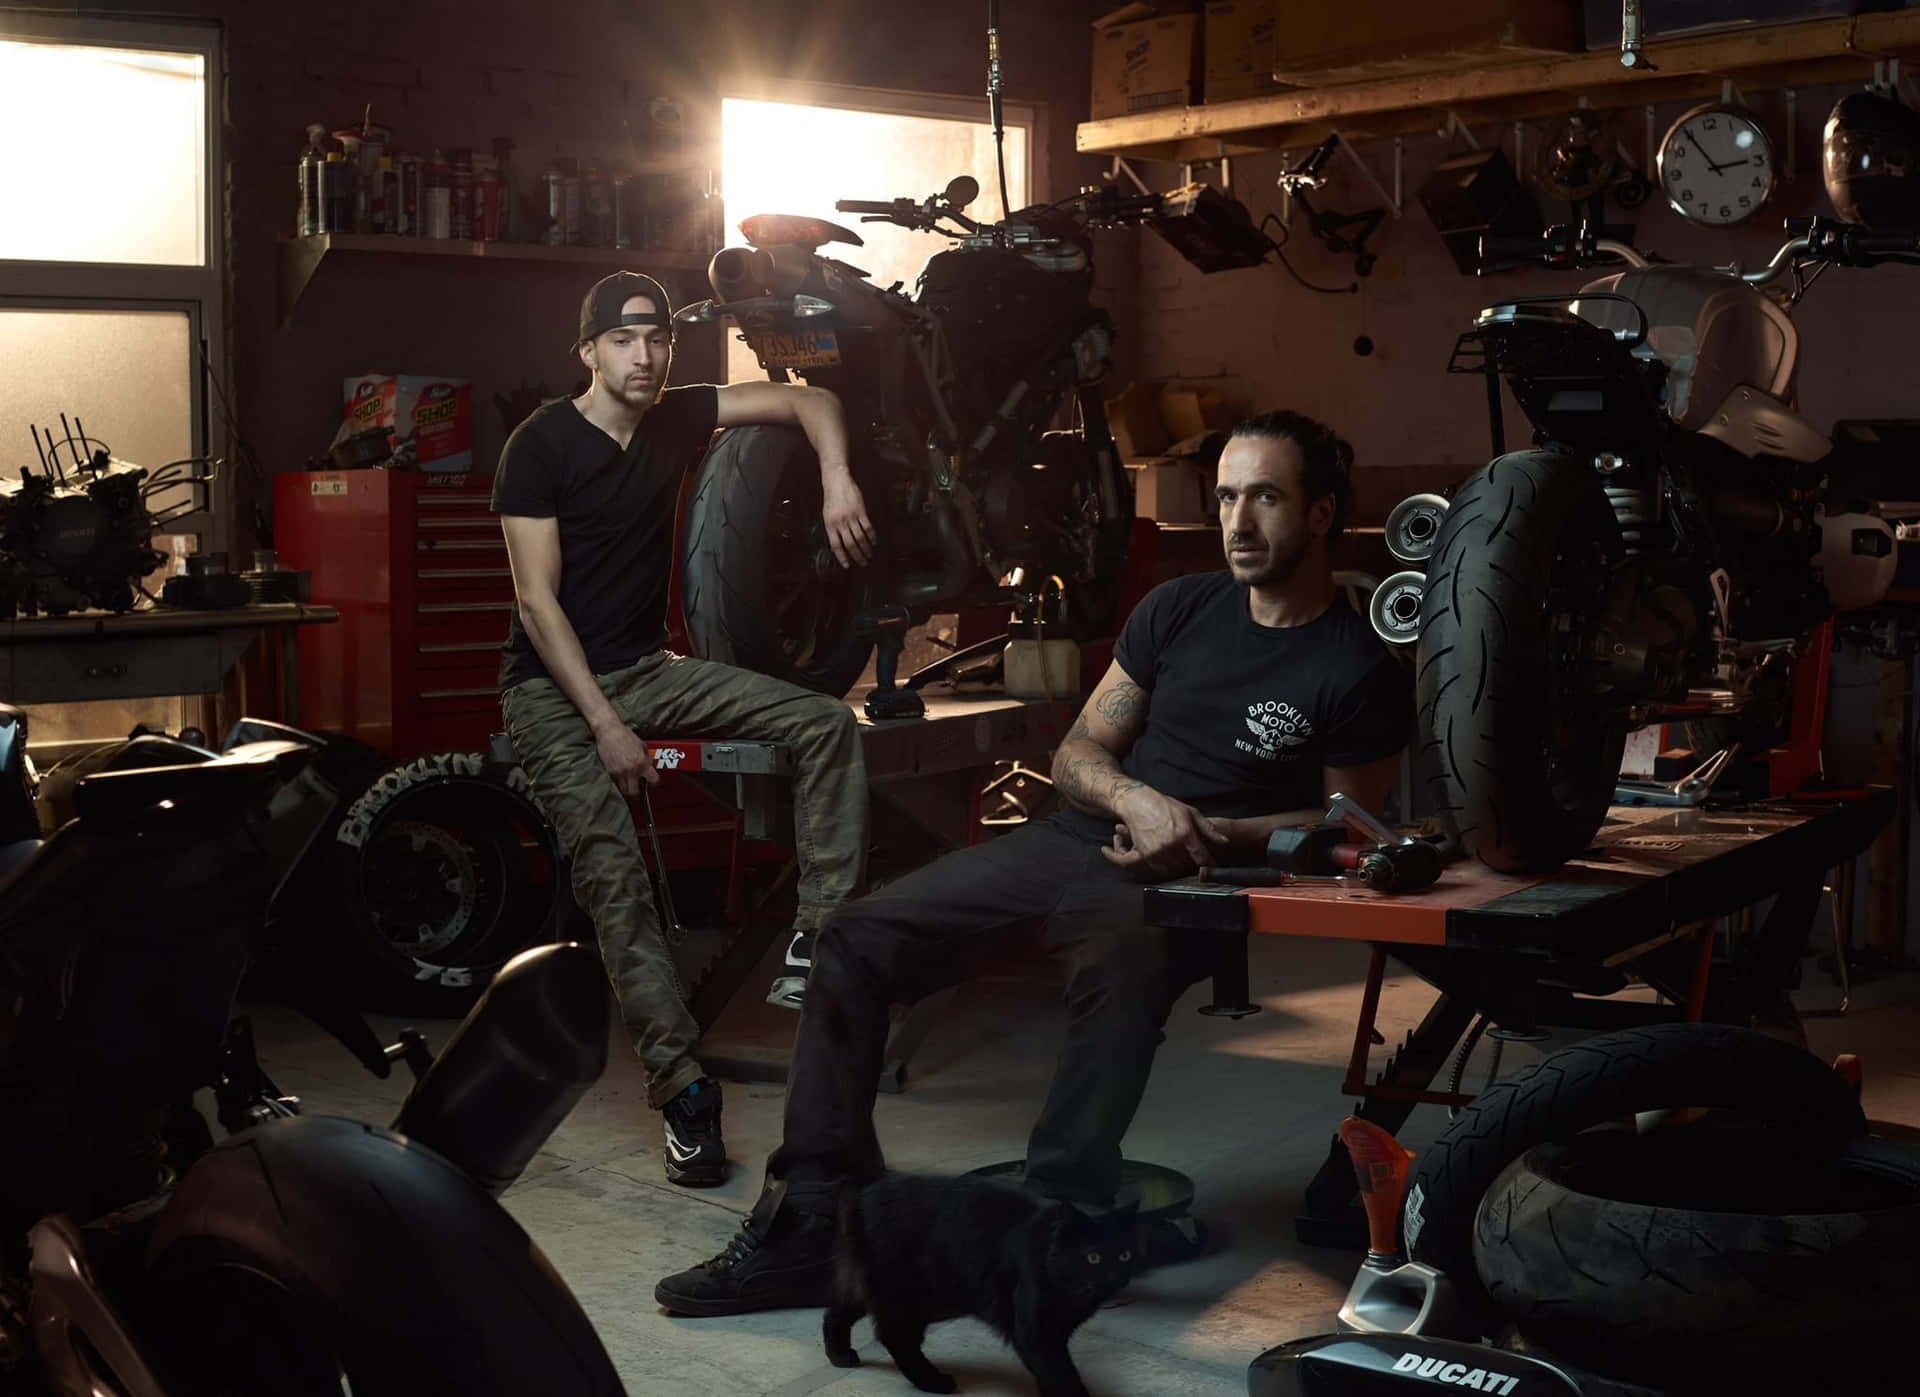 Two Men Sitting In A Garage With Motorcycles